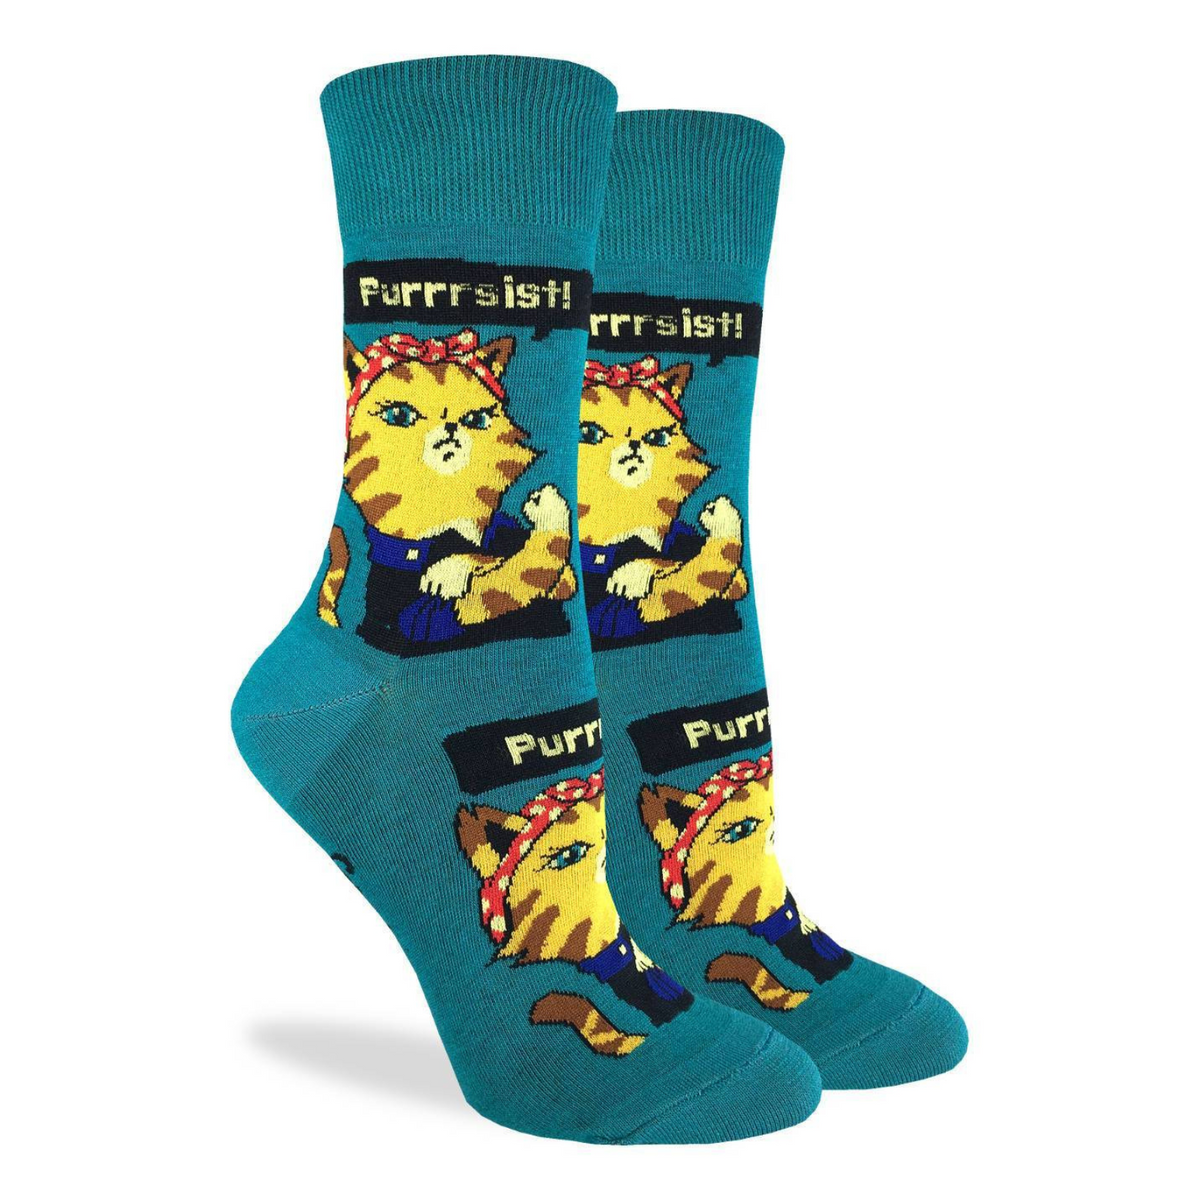 Good Luck Sock Purrsist women&#39;s teal crew sock featuring cat dressed as Rosie the Riveter saying &quot;Purrrsist!&quot;